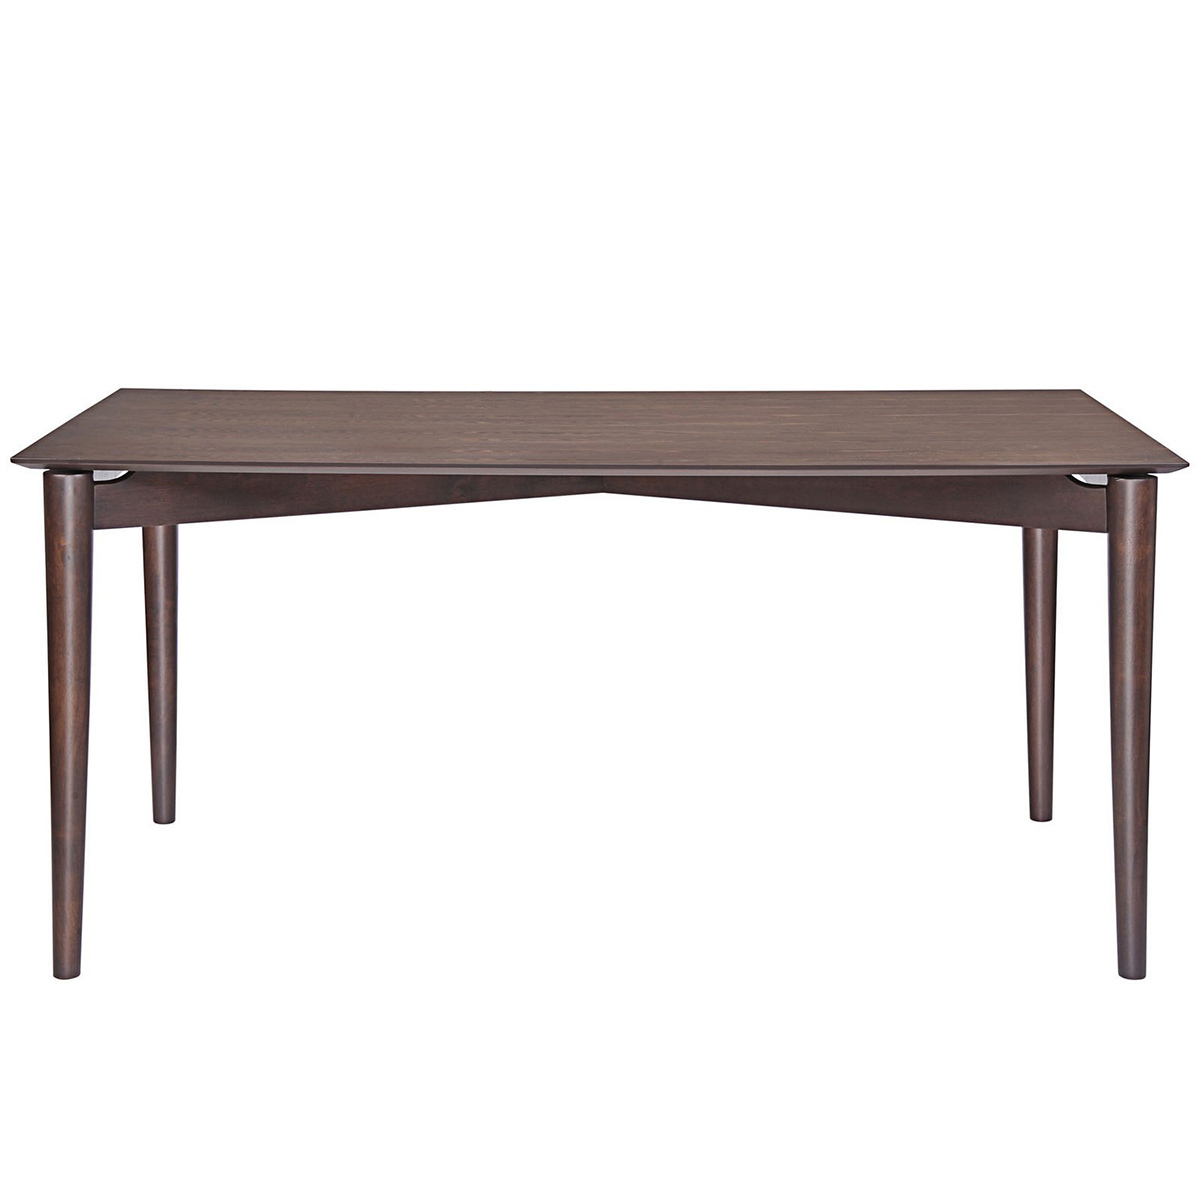 Modway Scant Dining Table - Walnut